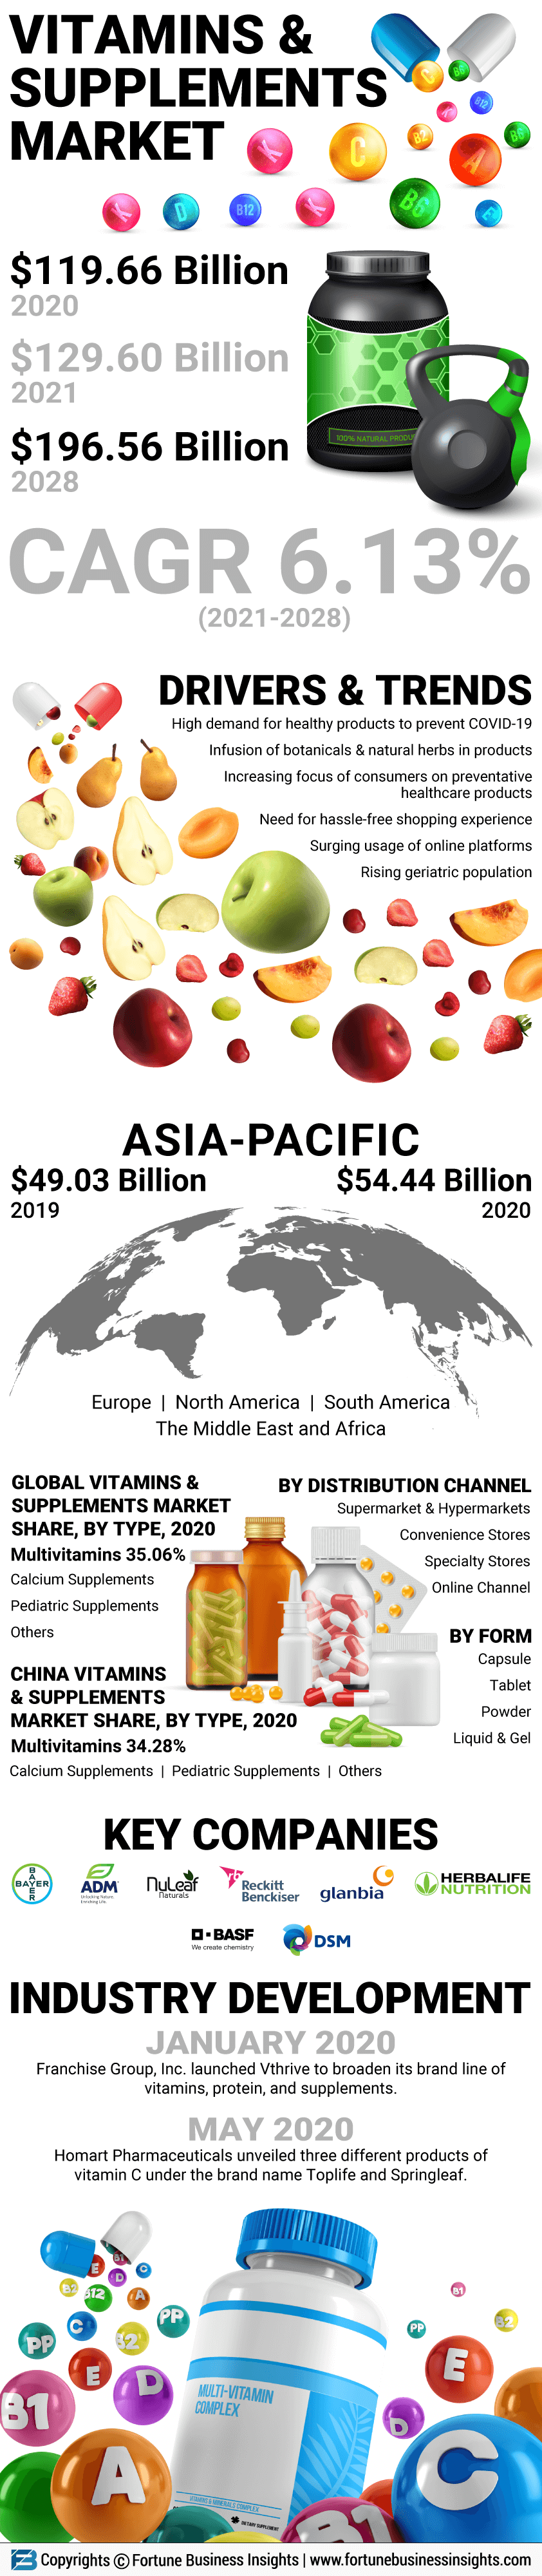 Vitamins and Supplements Market 